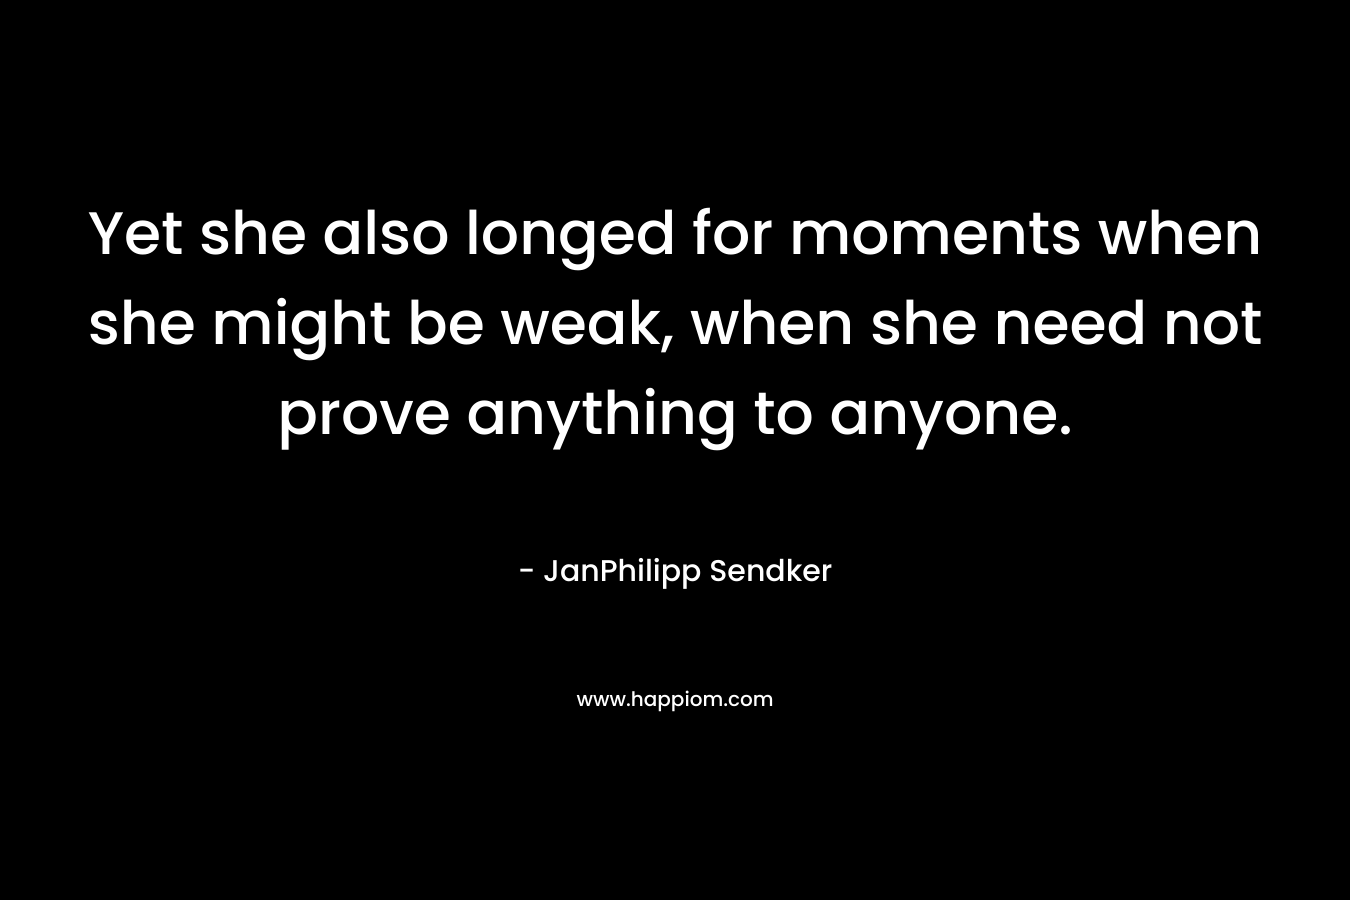 Yet she also longed for moments when she might be weak, when she need not prove anything to anyone.